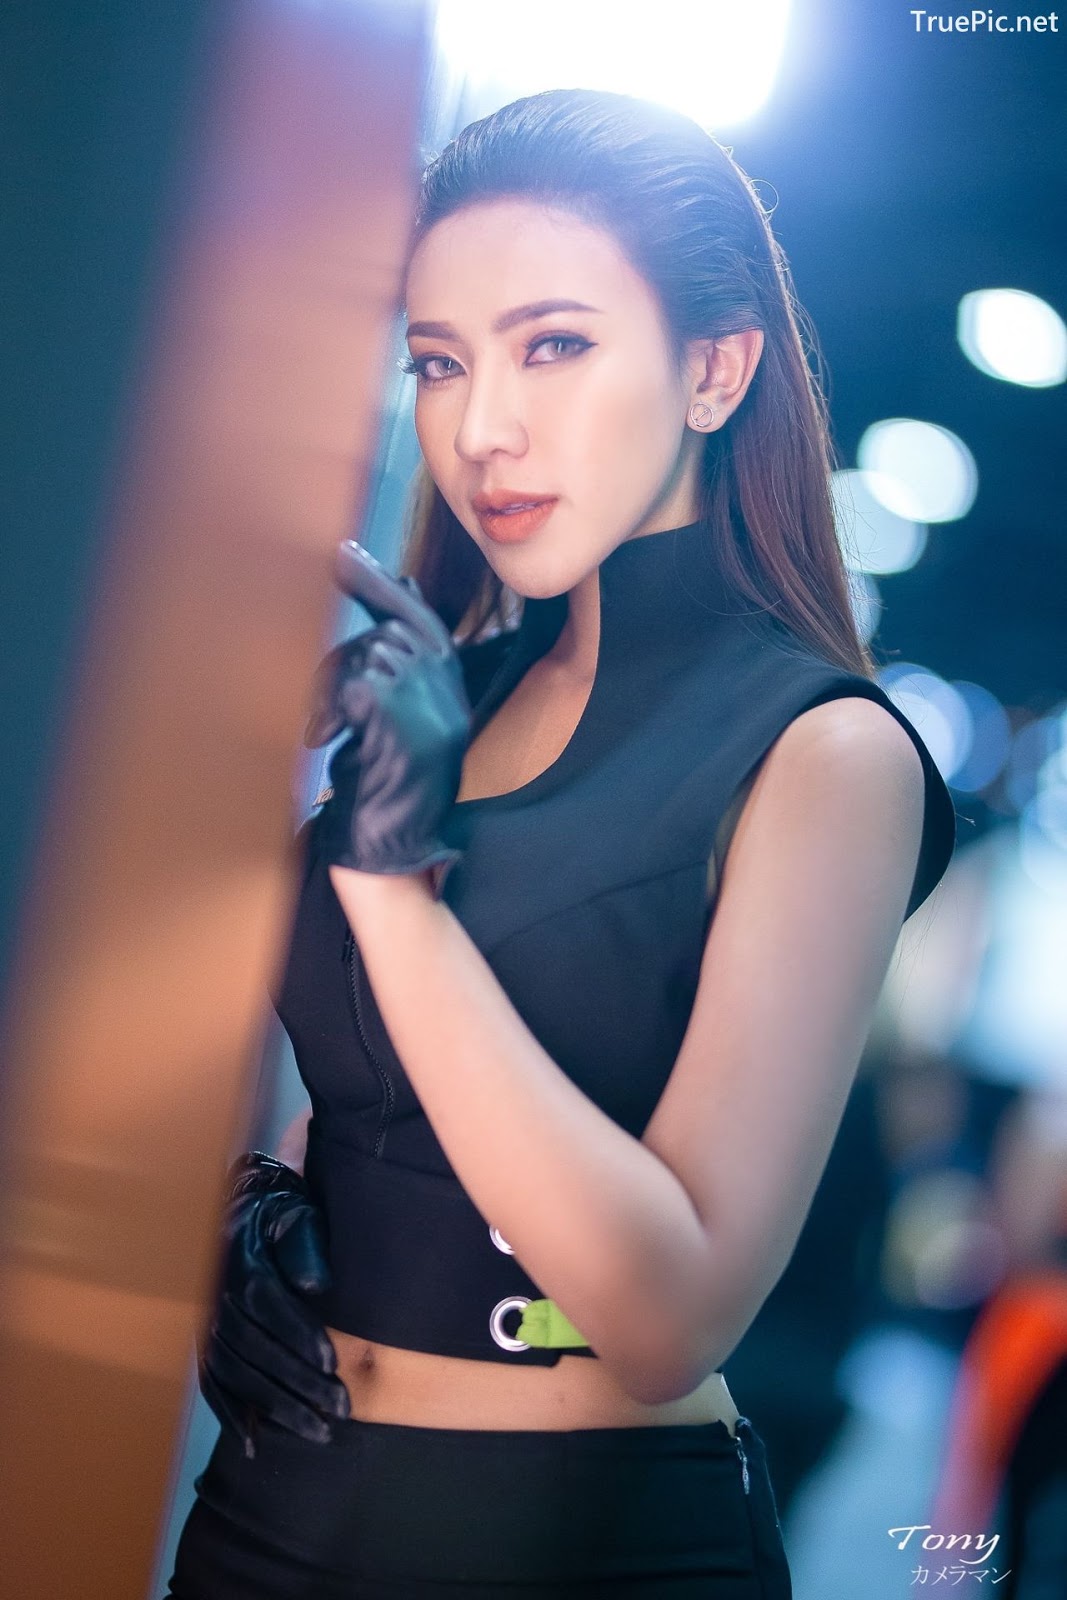 Image-Thailand-Hot-Model-Thai-Racing-Girl-At-Motor-Expo-2019-TruePic.net- Picture-83